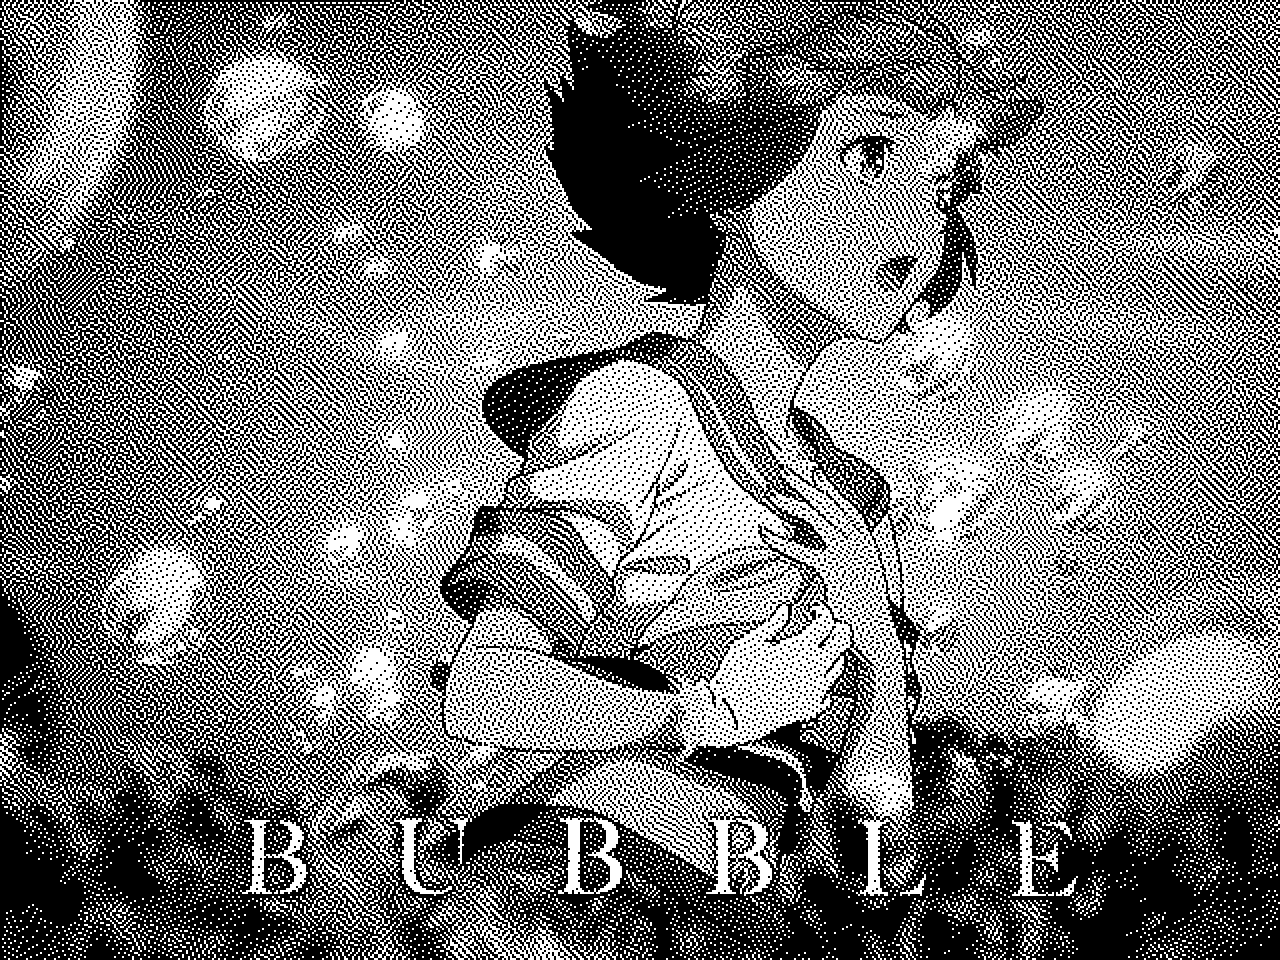 Cover image of the anime Bubble